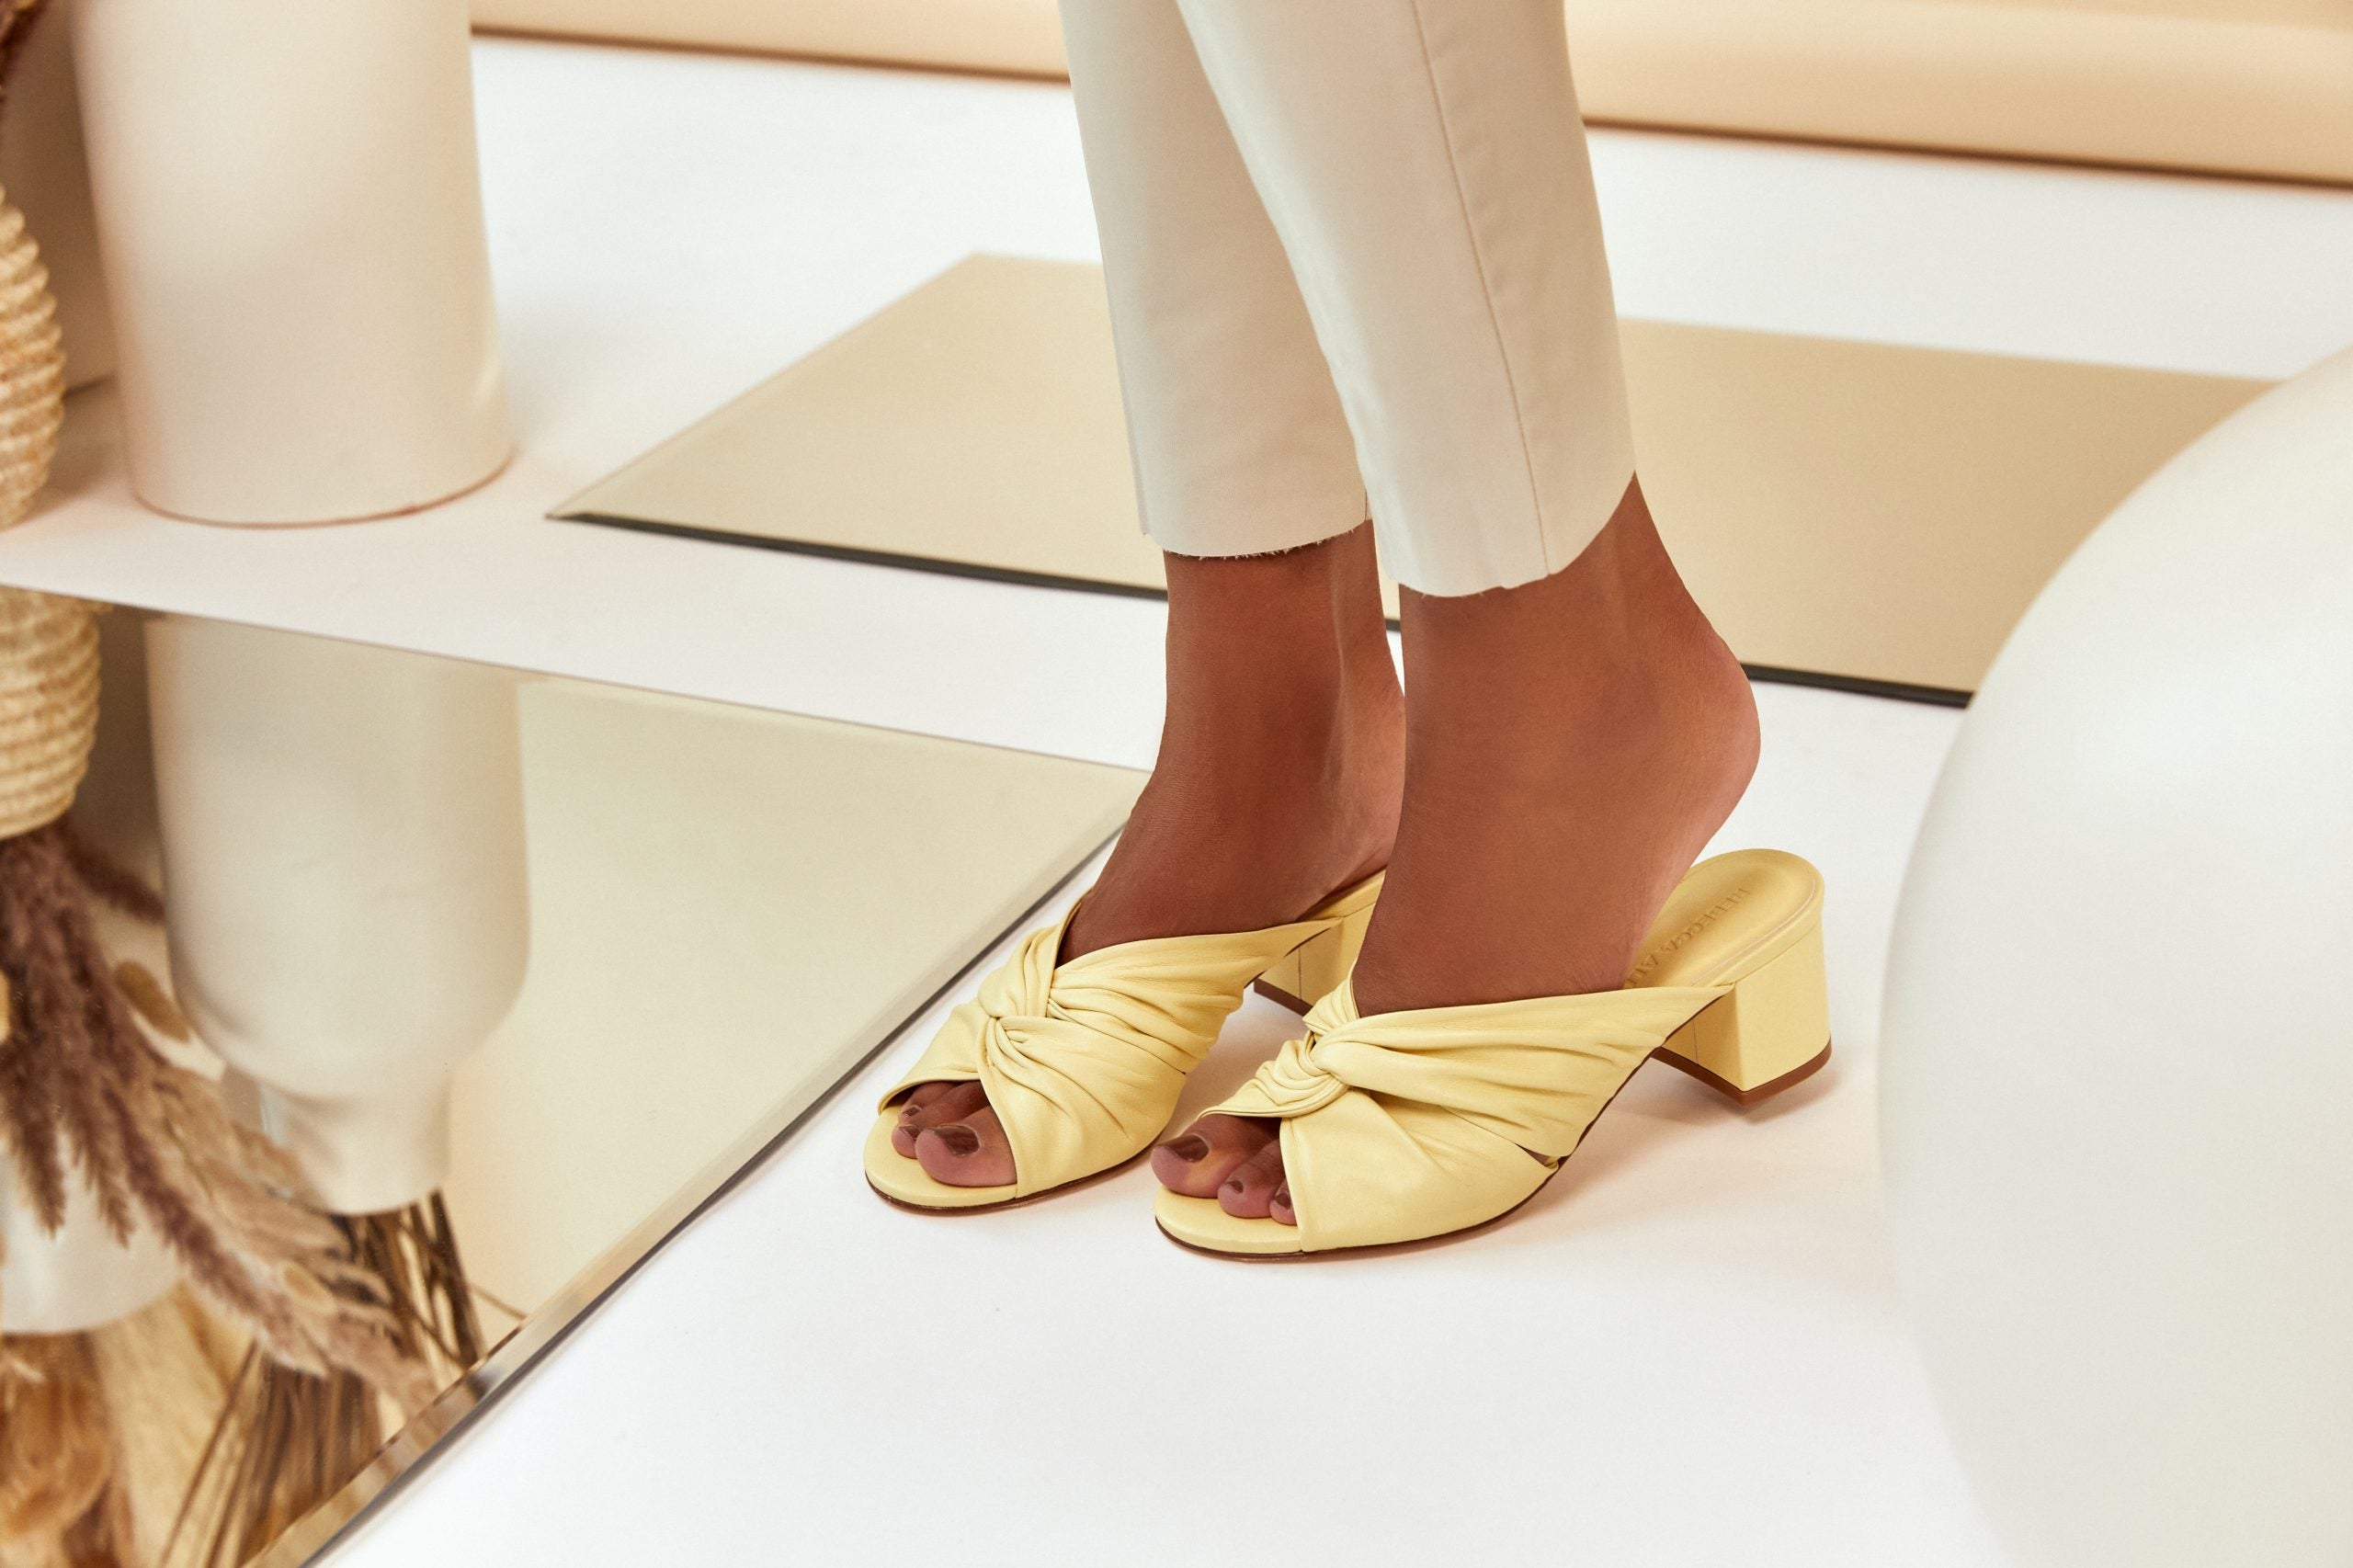 Rebecca Allen New Resort Shoe Collection Is Available At Nordstrom